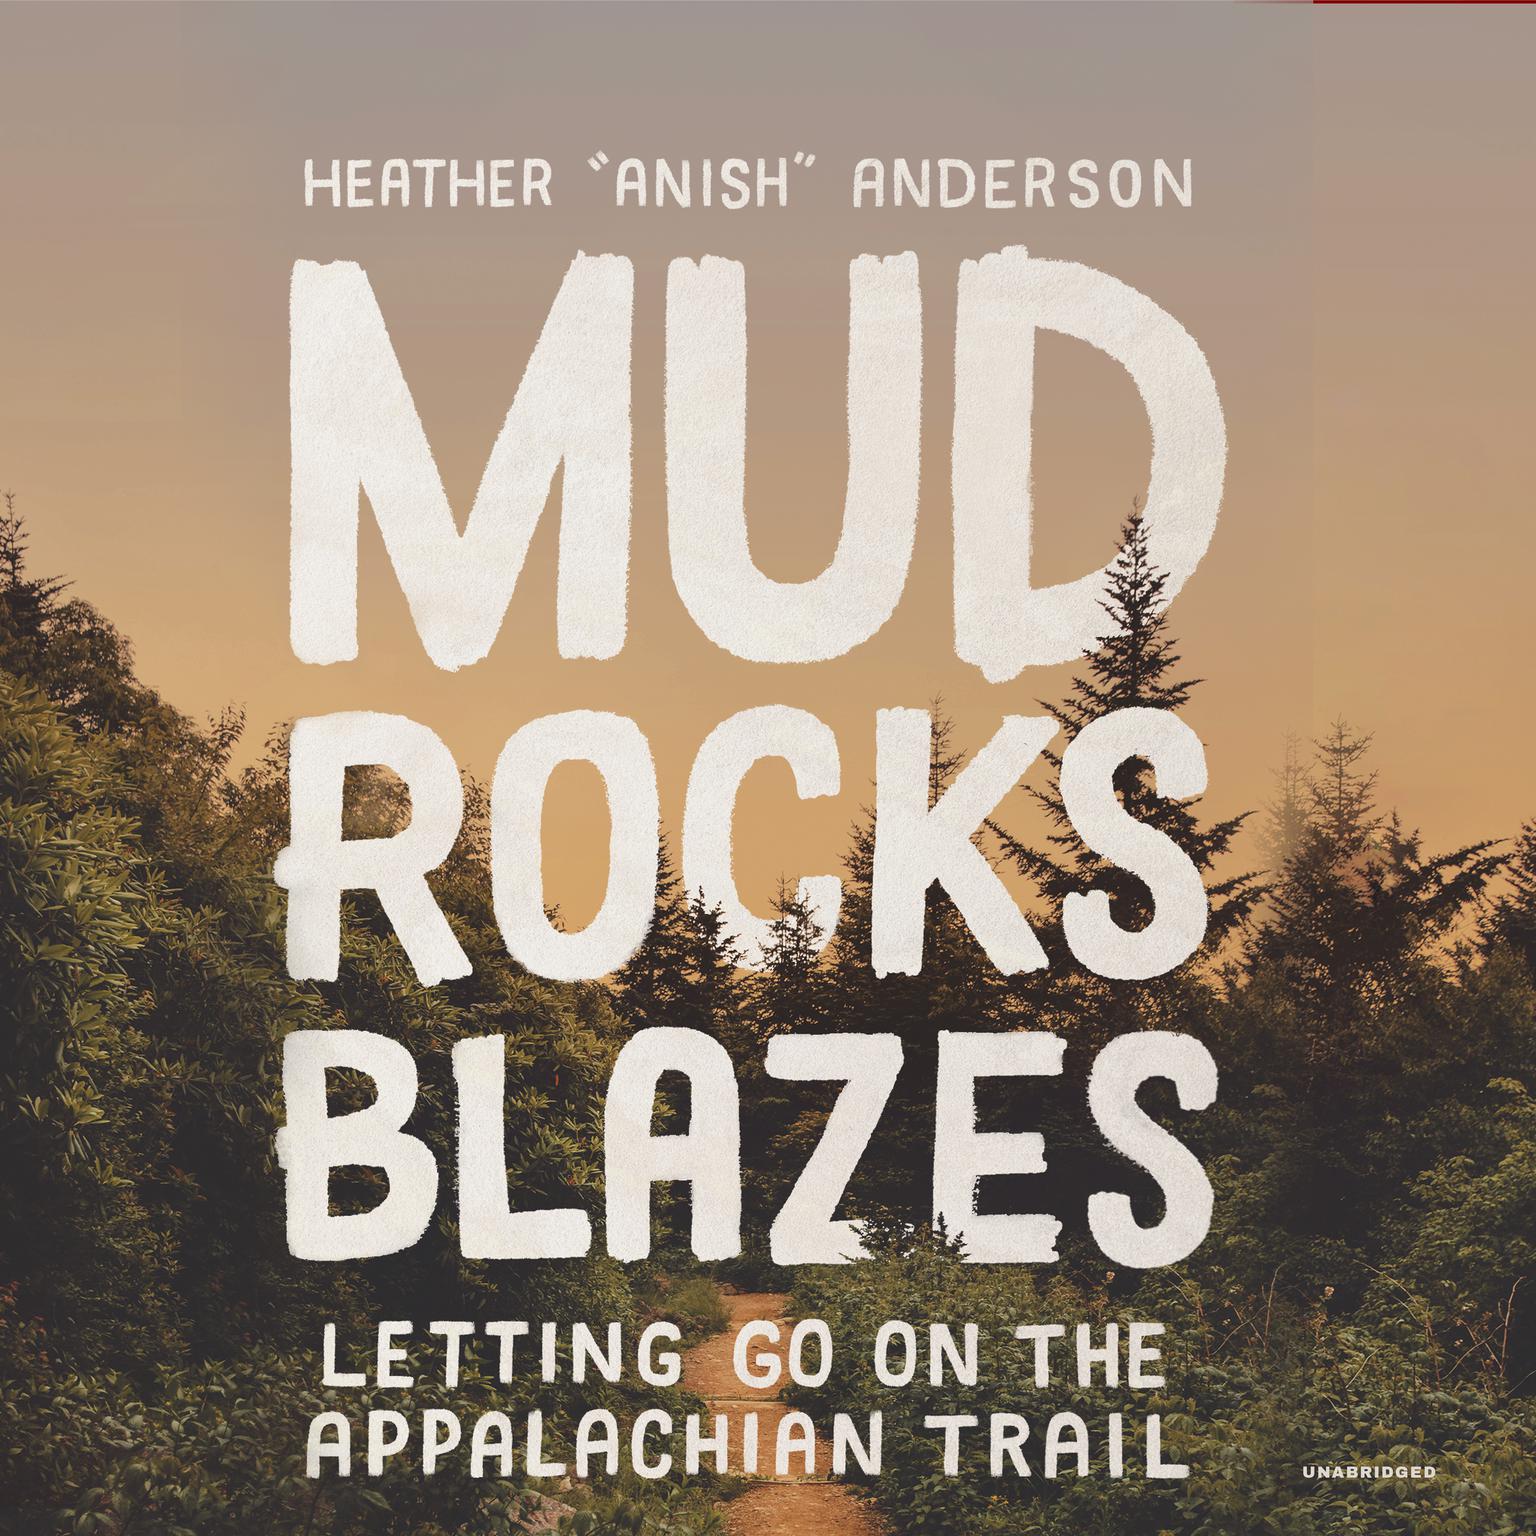 Mud, Rocks, Blazes: Letting Go on the Applachian Trail Audiobook, by Heather Anderson